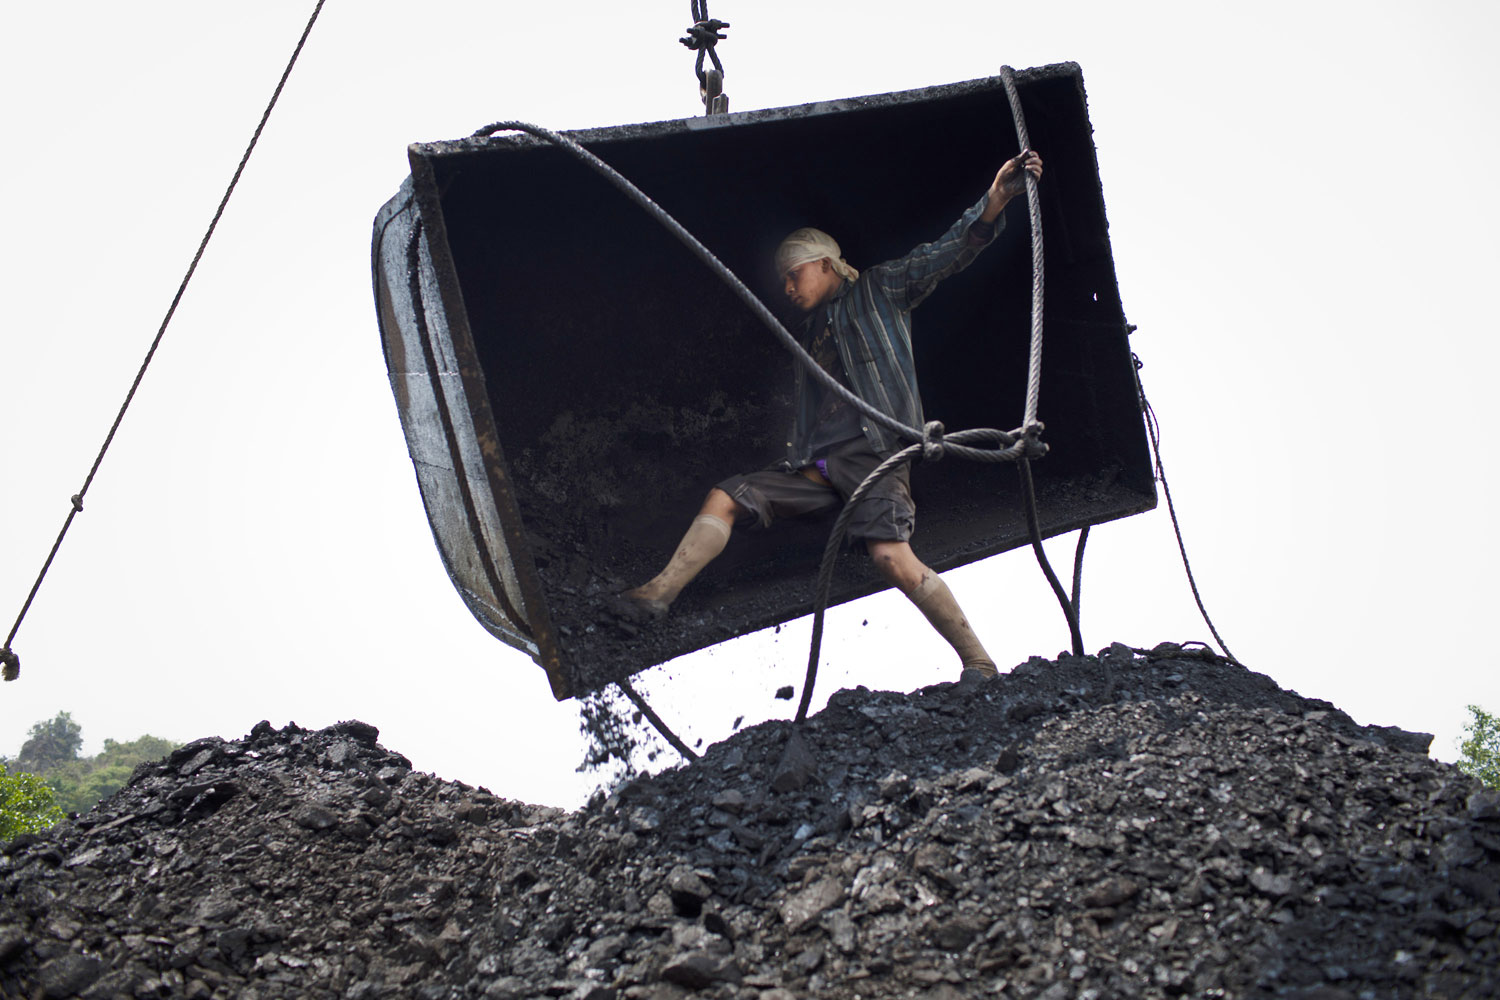 Fourteen-year-old Chhai Lyngdoh, kicks out the coal from a container, as it is emptied onto a heap, after being craned out of a 300ft deep mine shaft.